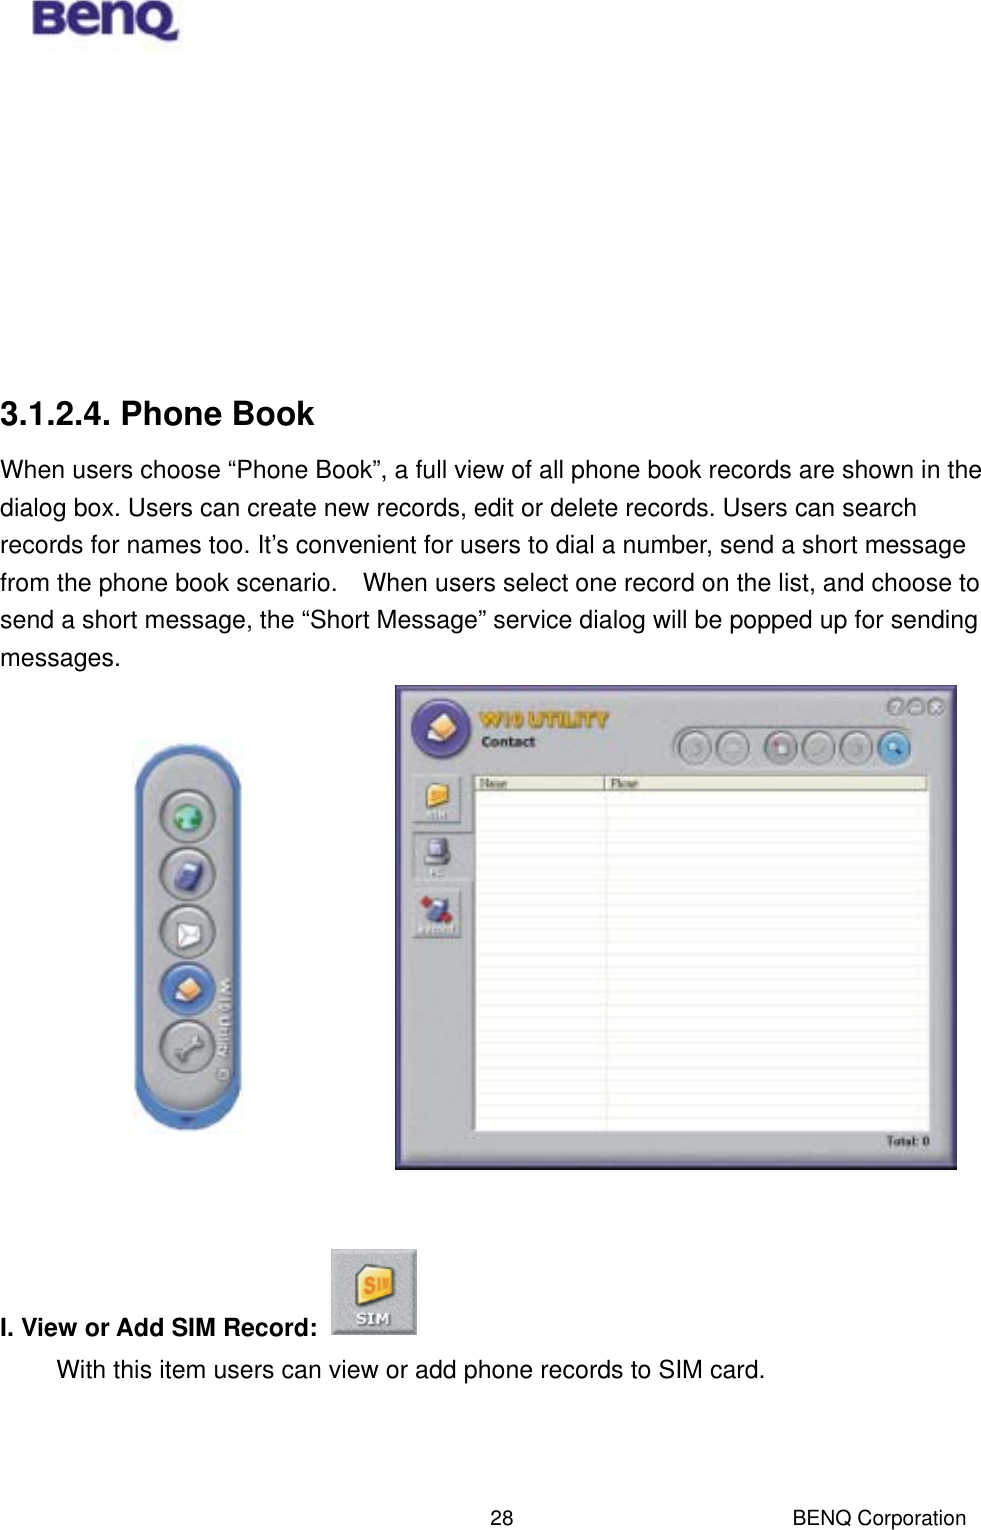  BENQ Corporation 28        3.1.2.4. Phone Book When users choose “Phone Book”, a full view of all phone book records are shown in the dialog box. Users can create new records, edit or delete records. Users can search records for names too. It’s convenient for users to dial a number, send a short message from the phone book scenario.    When users select one record on the list, and choose to send a short message, the “Short Message” service dialog will be popped up for sending messages.                I. View or Add SIM Record:   With this item users can view or add phone records to SIM card.    